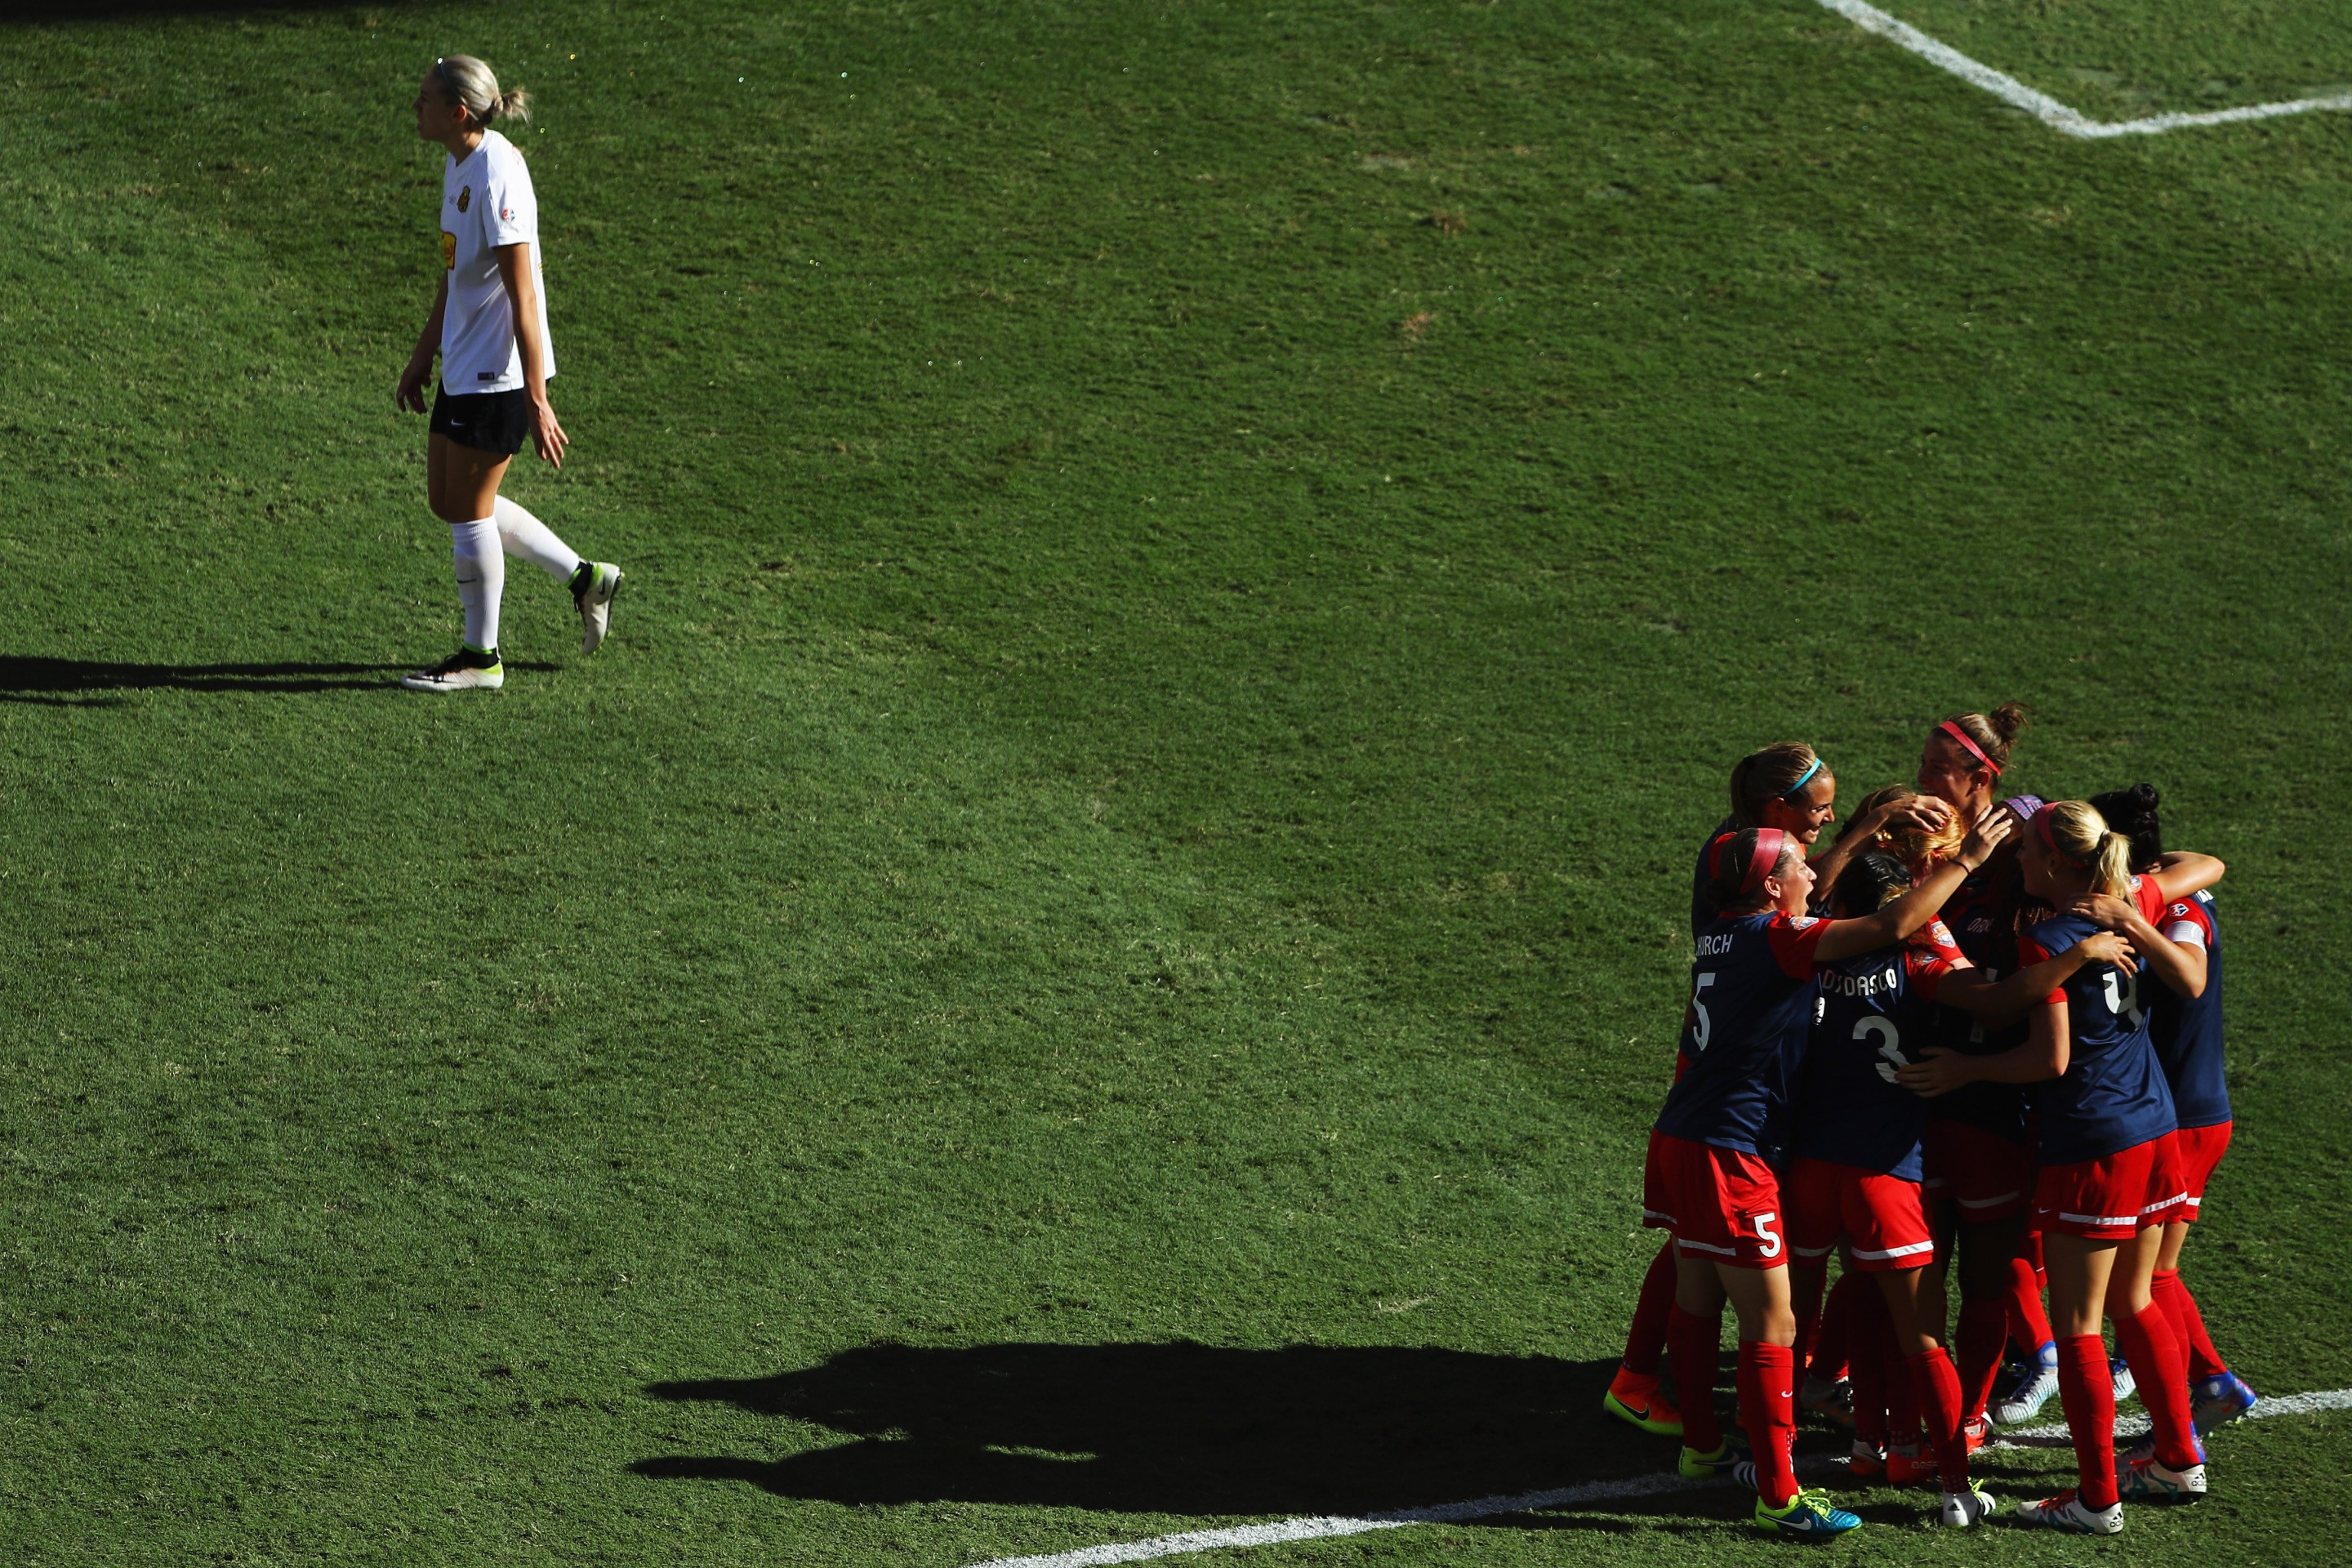 Crystal Dunn #19 of the Washington Spirit celebrates with her teammates after her goal against the Western New York Flash during the first half of the 2016 NWSL Championship at BBVA Compass Stadium on October 9, 2016 in Houston, Texas.